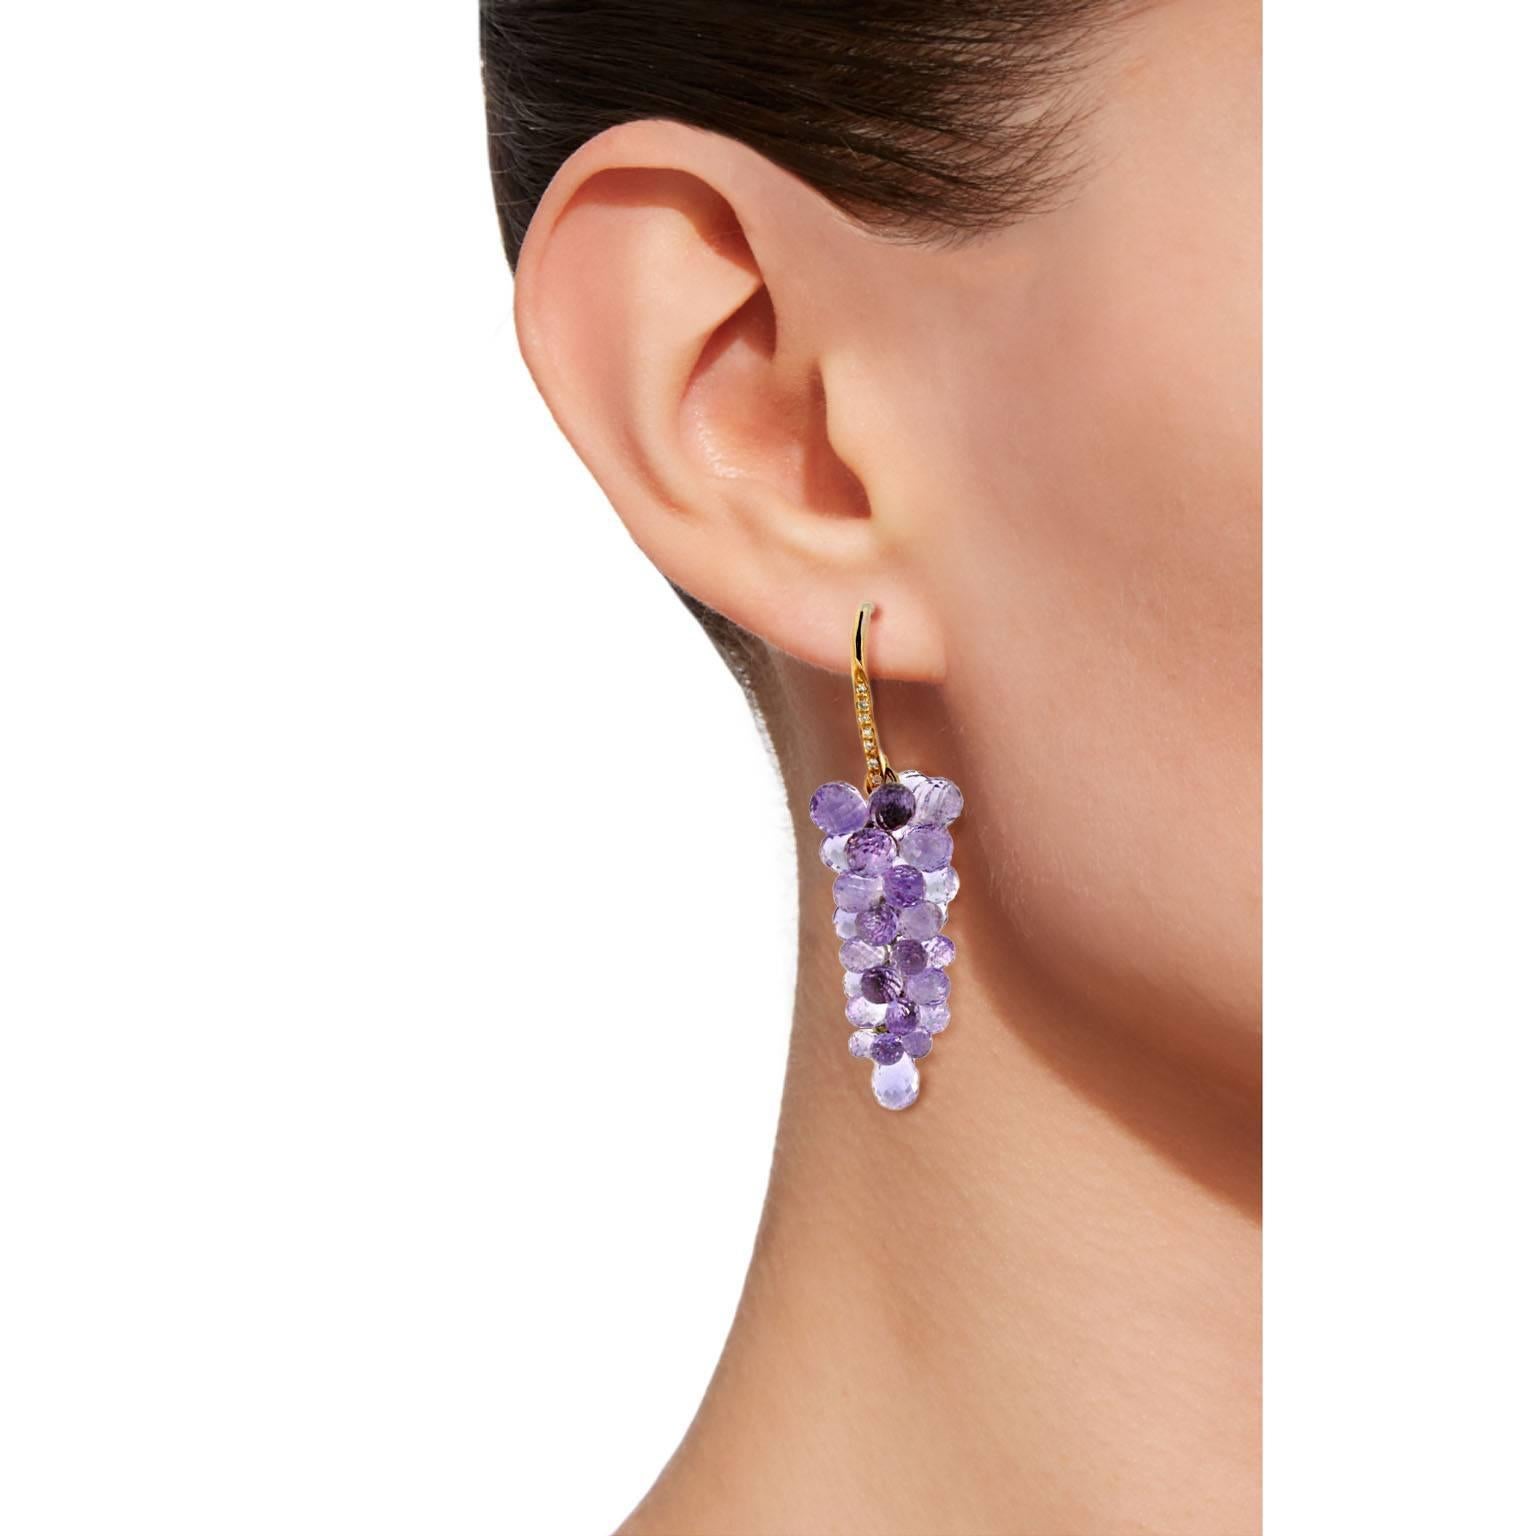 Jona design collection, 18 karat rose gold pendant earrings, featuring 43.80 carats of amethyst briolette clusters and 0.10 carats of white diamonds.  

All Jona jewelry is new and has never been previously owned or worn.